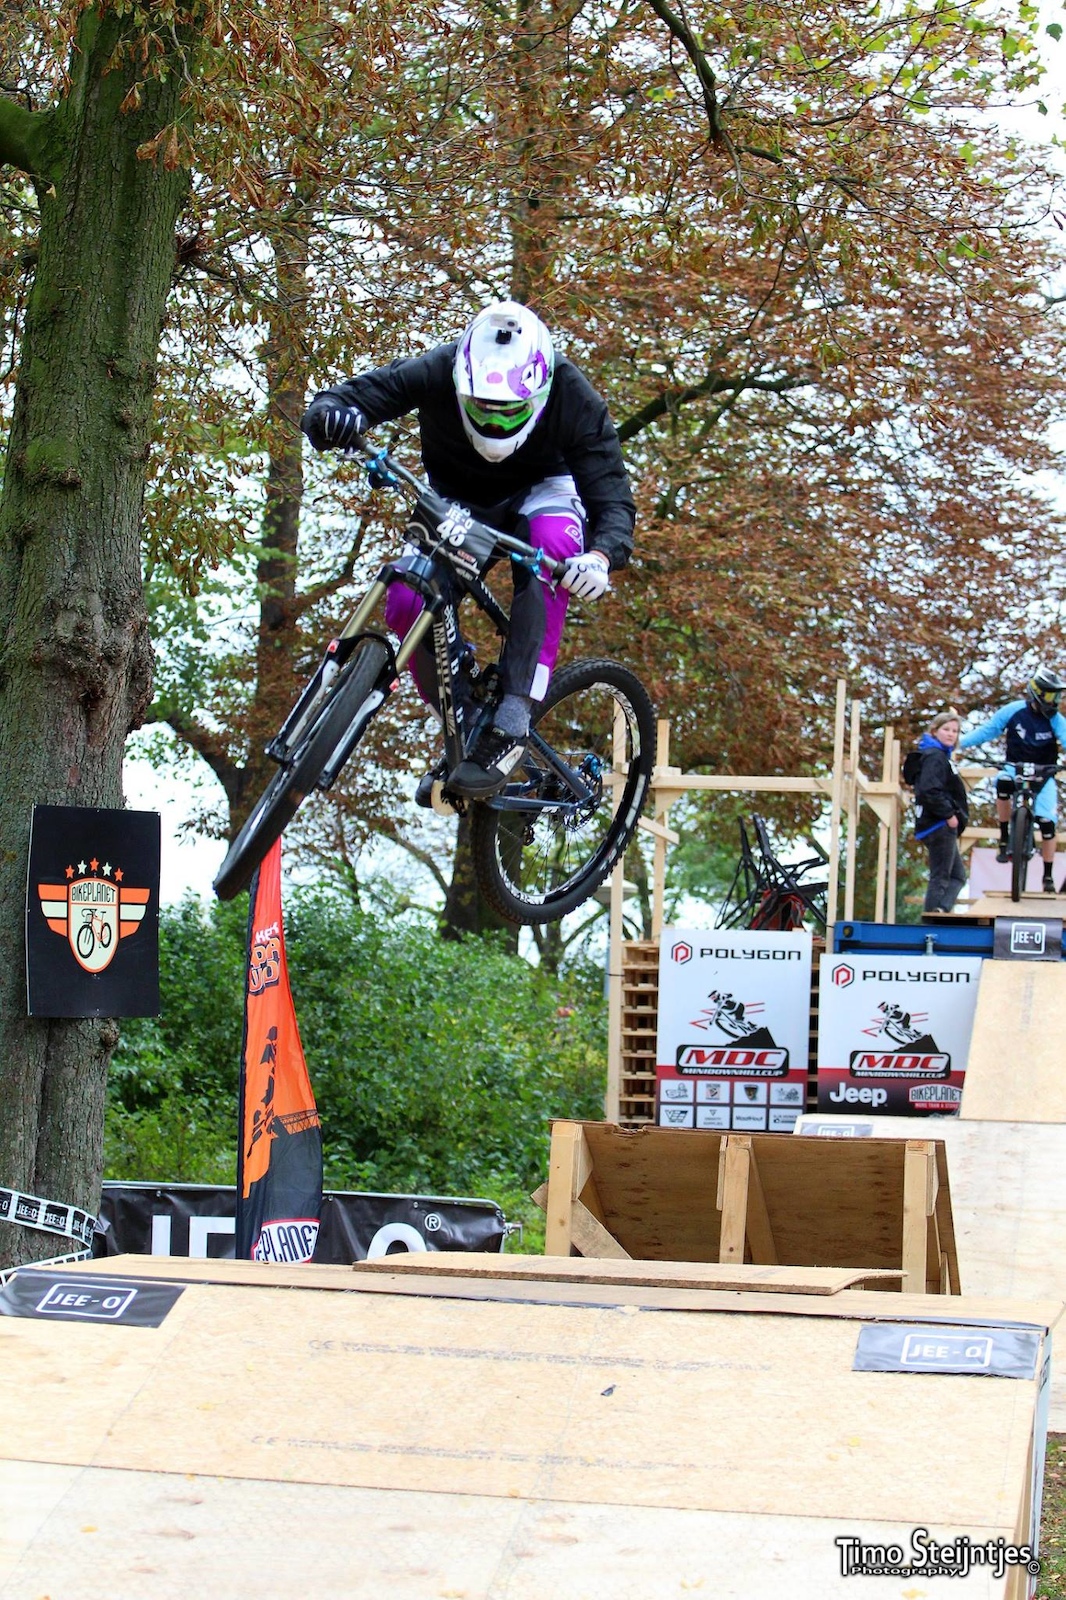 City downhill in Nijmegen, Holland.
#DABOMB
#Fouriers
#MicroclairSports
#O'neal
#Enjoytheride
#Bengalbrakes
#WiMiUS